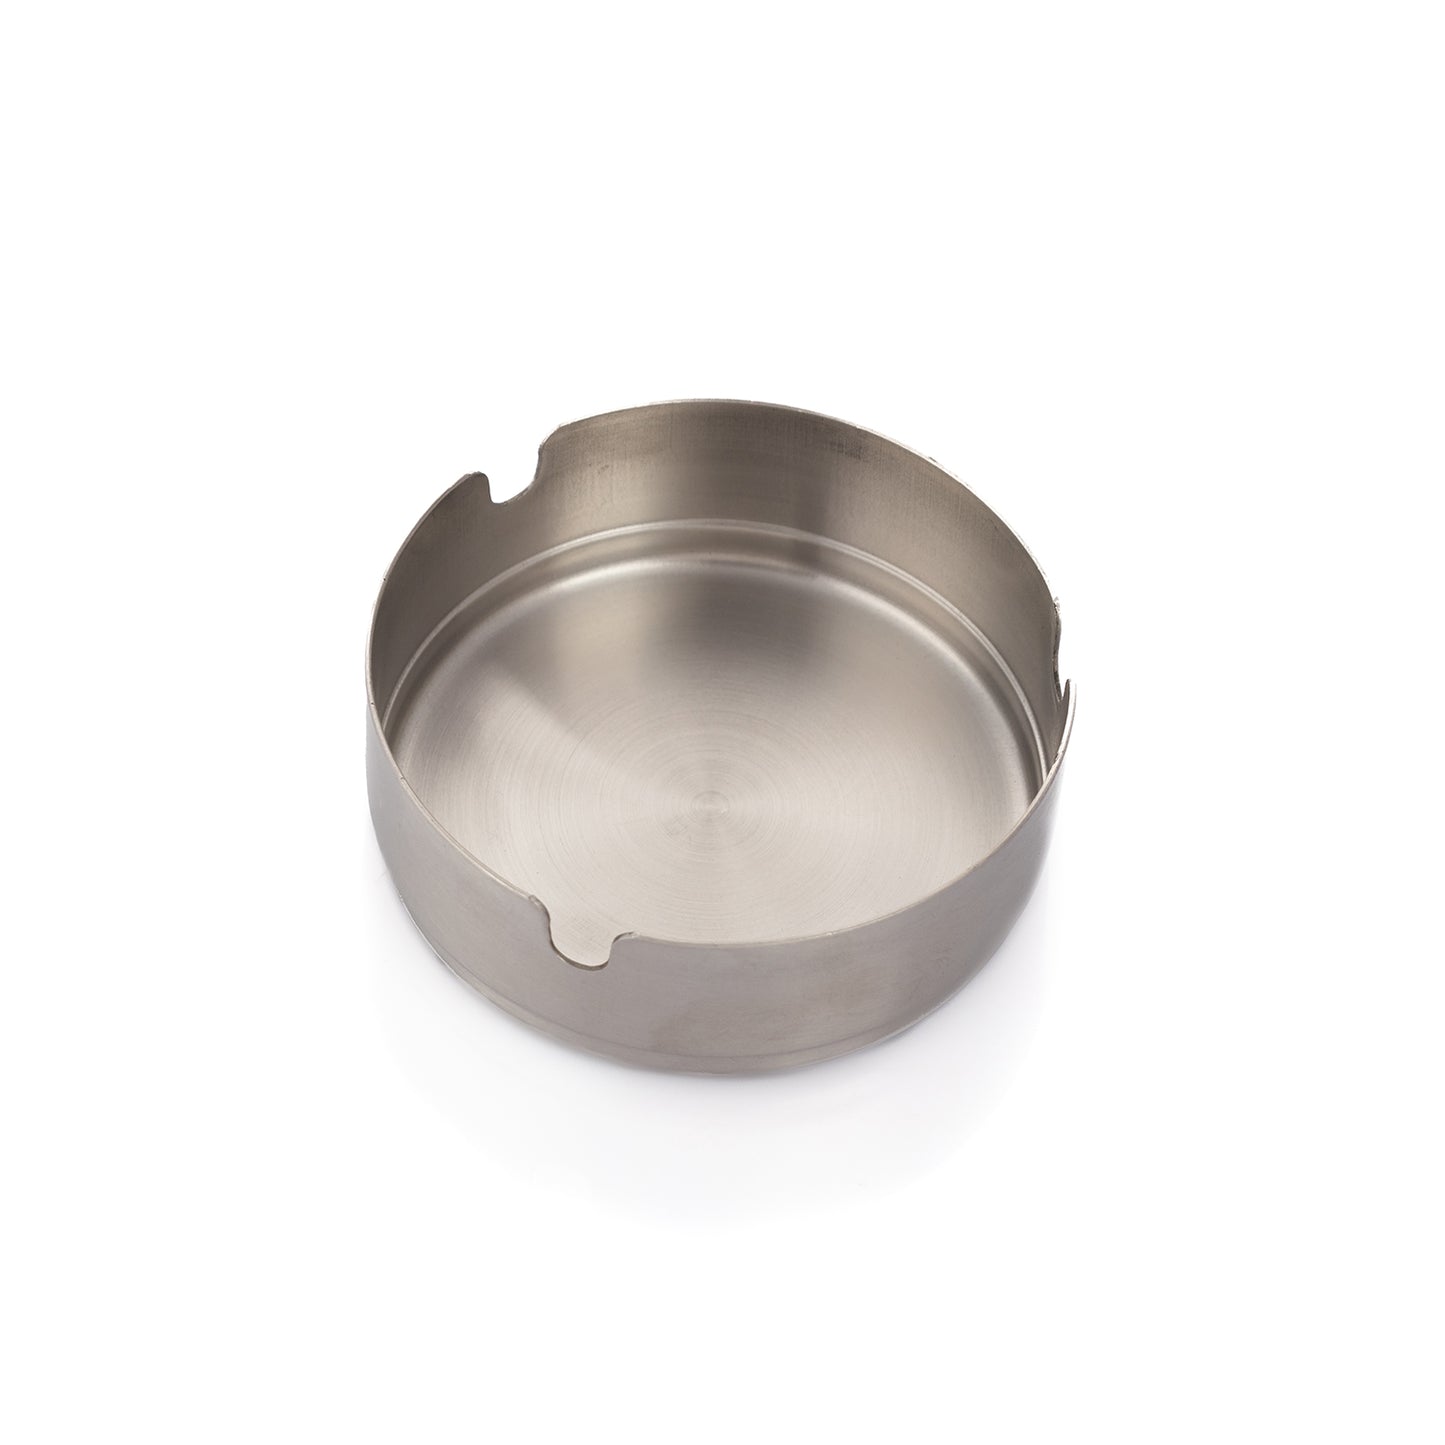 8cm Stainless Steel Ashtray Round